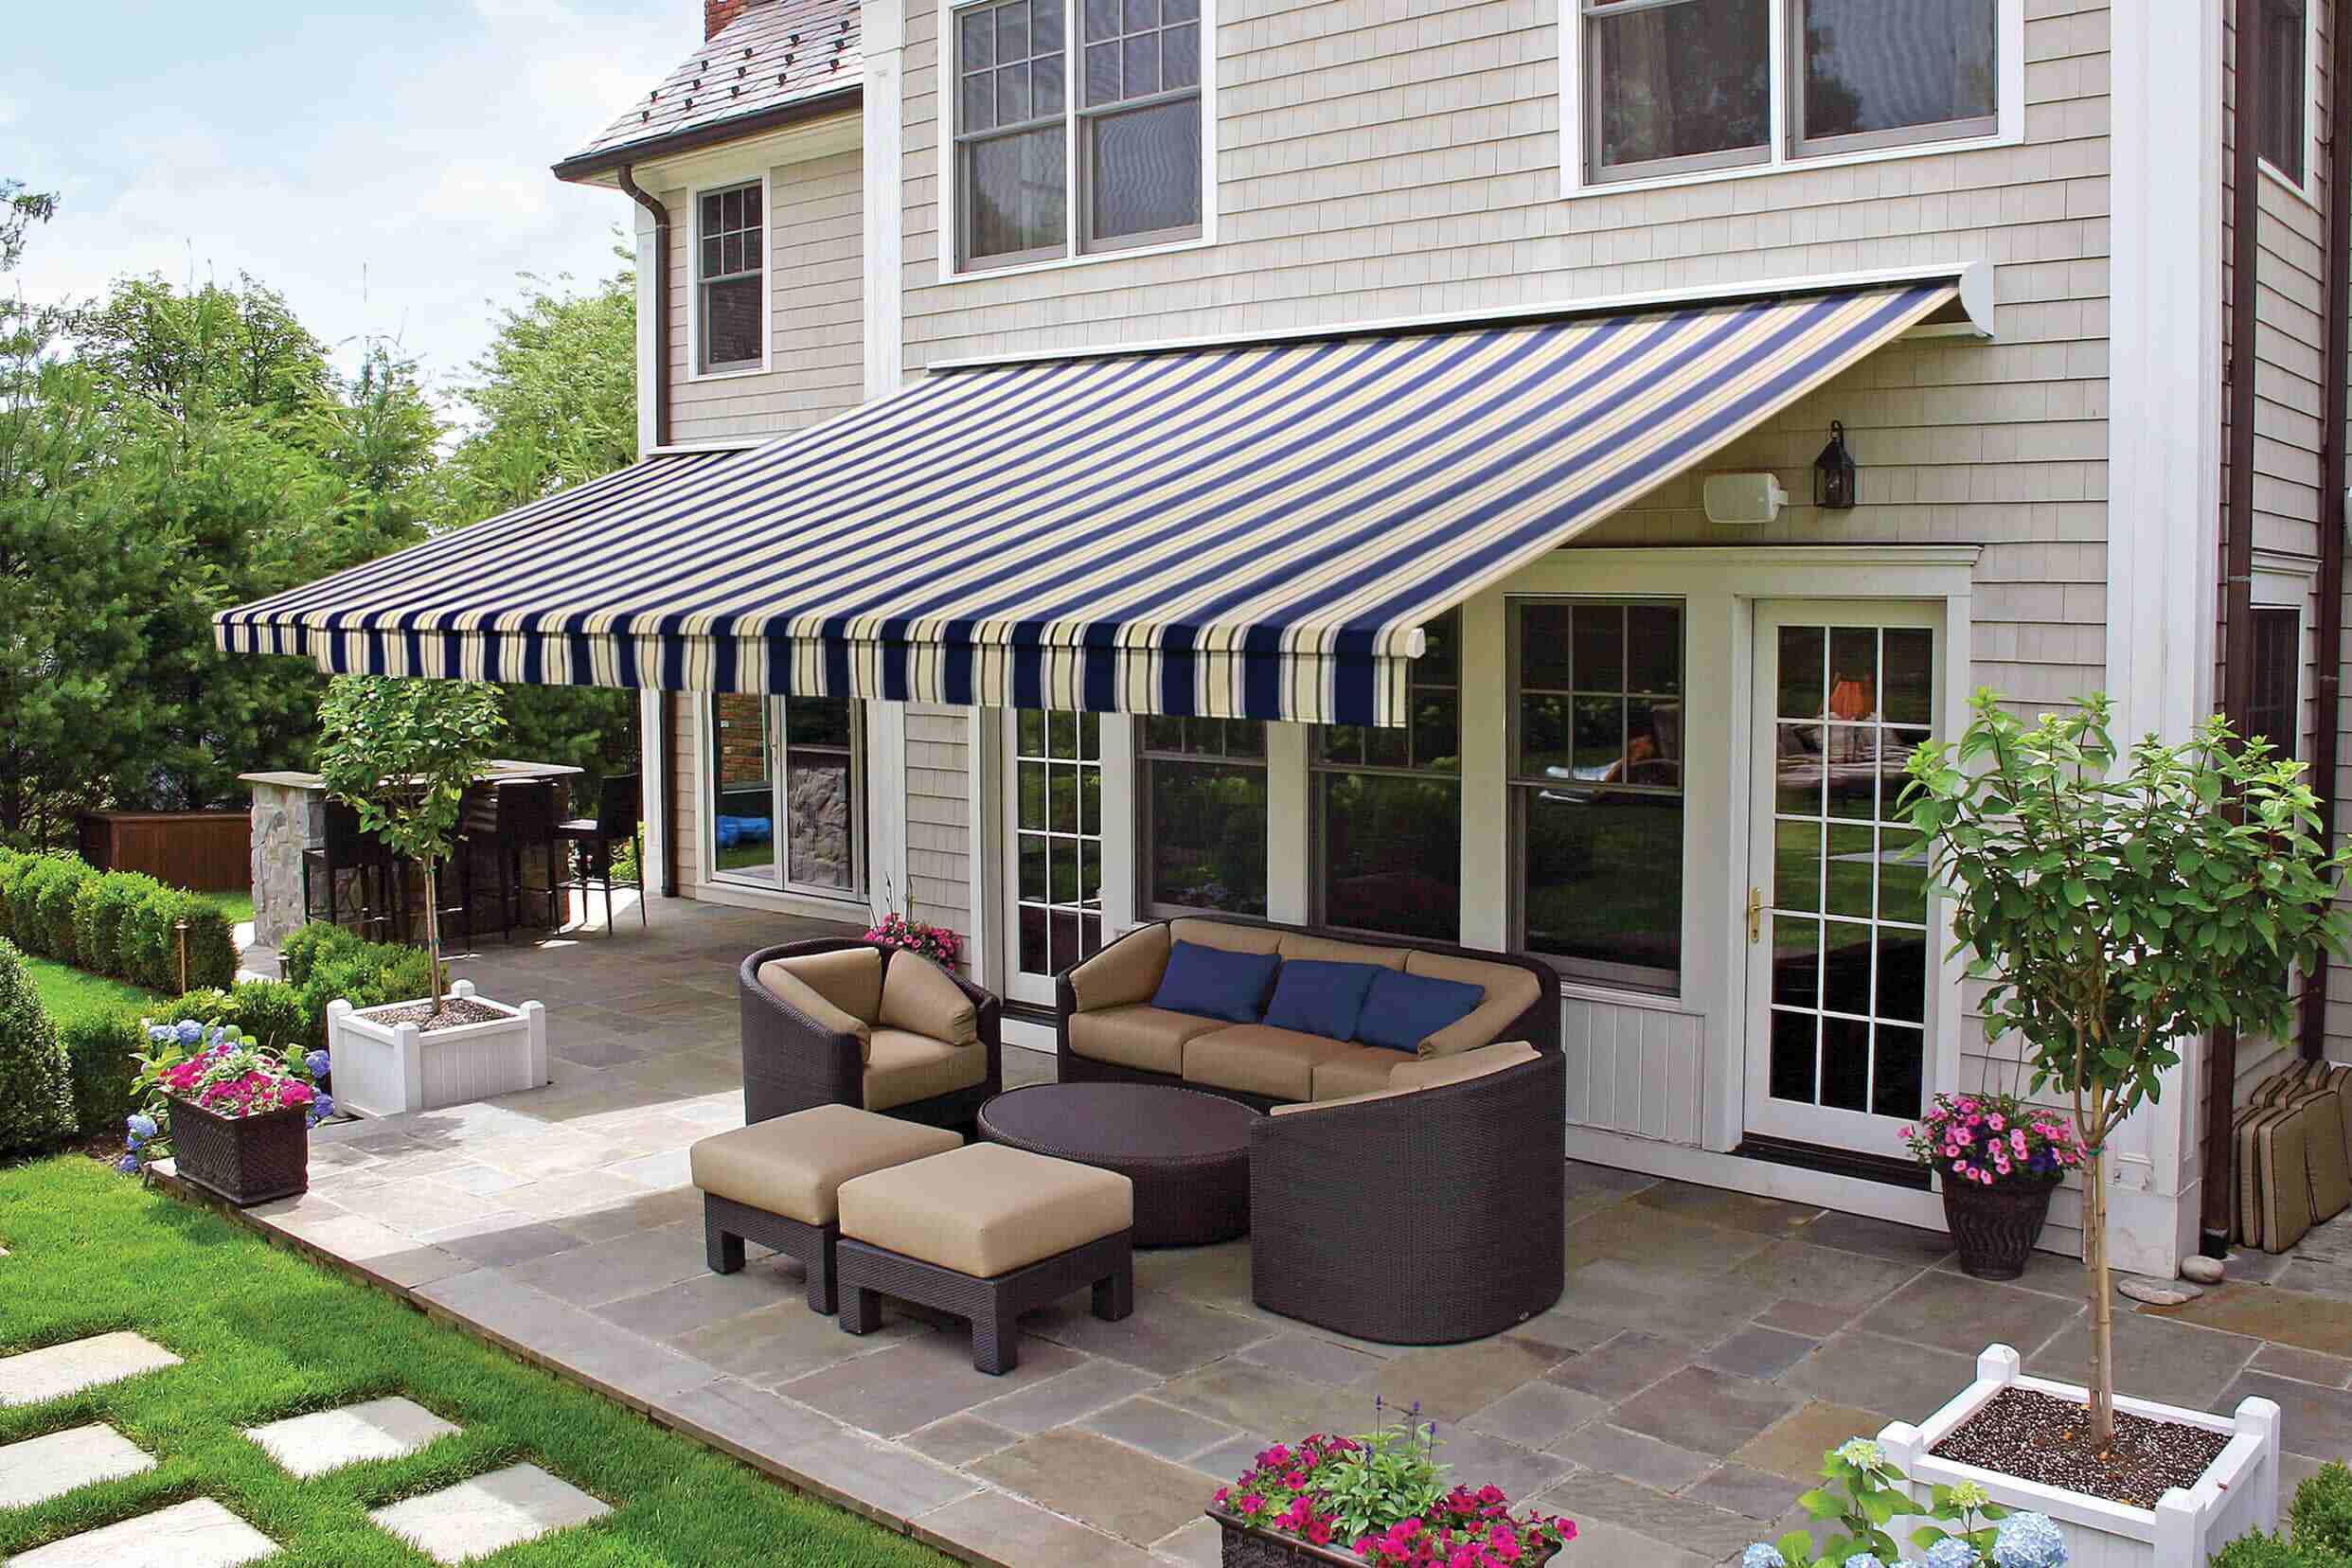 How To Make A Retractable Awning